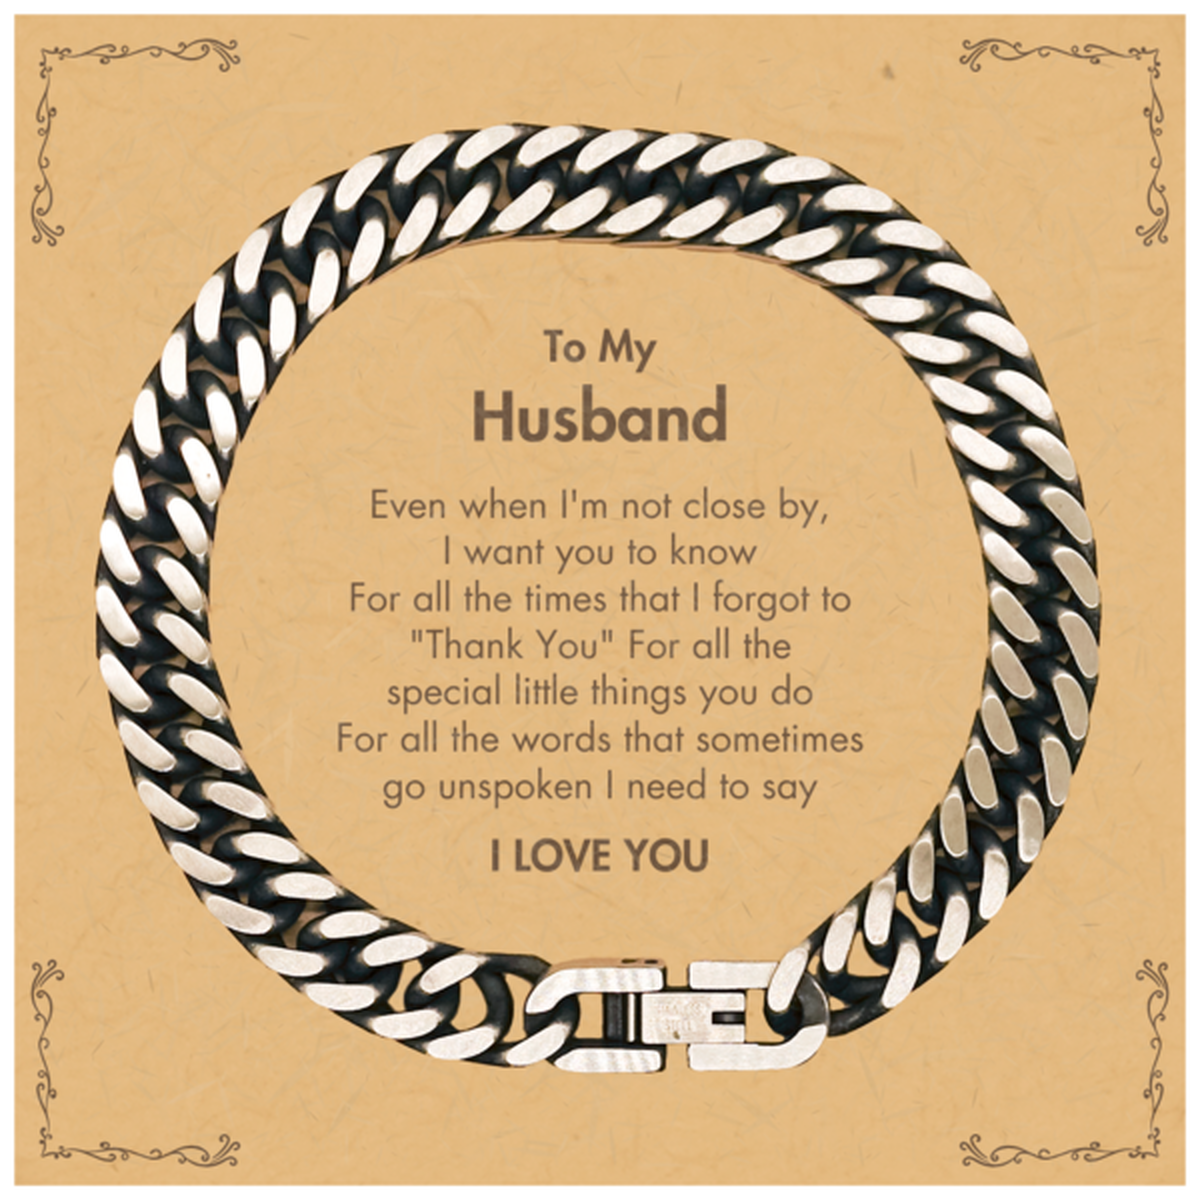 Thank You Gifts for Husband, Keepsake Cuban Link Chain Bracelet Gifts for Husband Birthday Mother's day Father's Day Husband For all the words That sometimes go unspoken I need to say I LOVE YOU